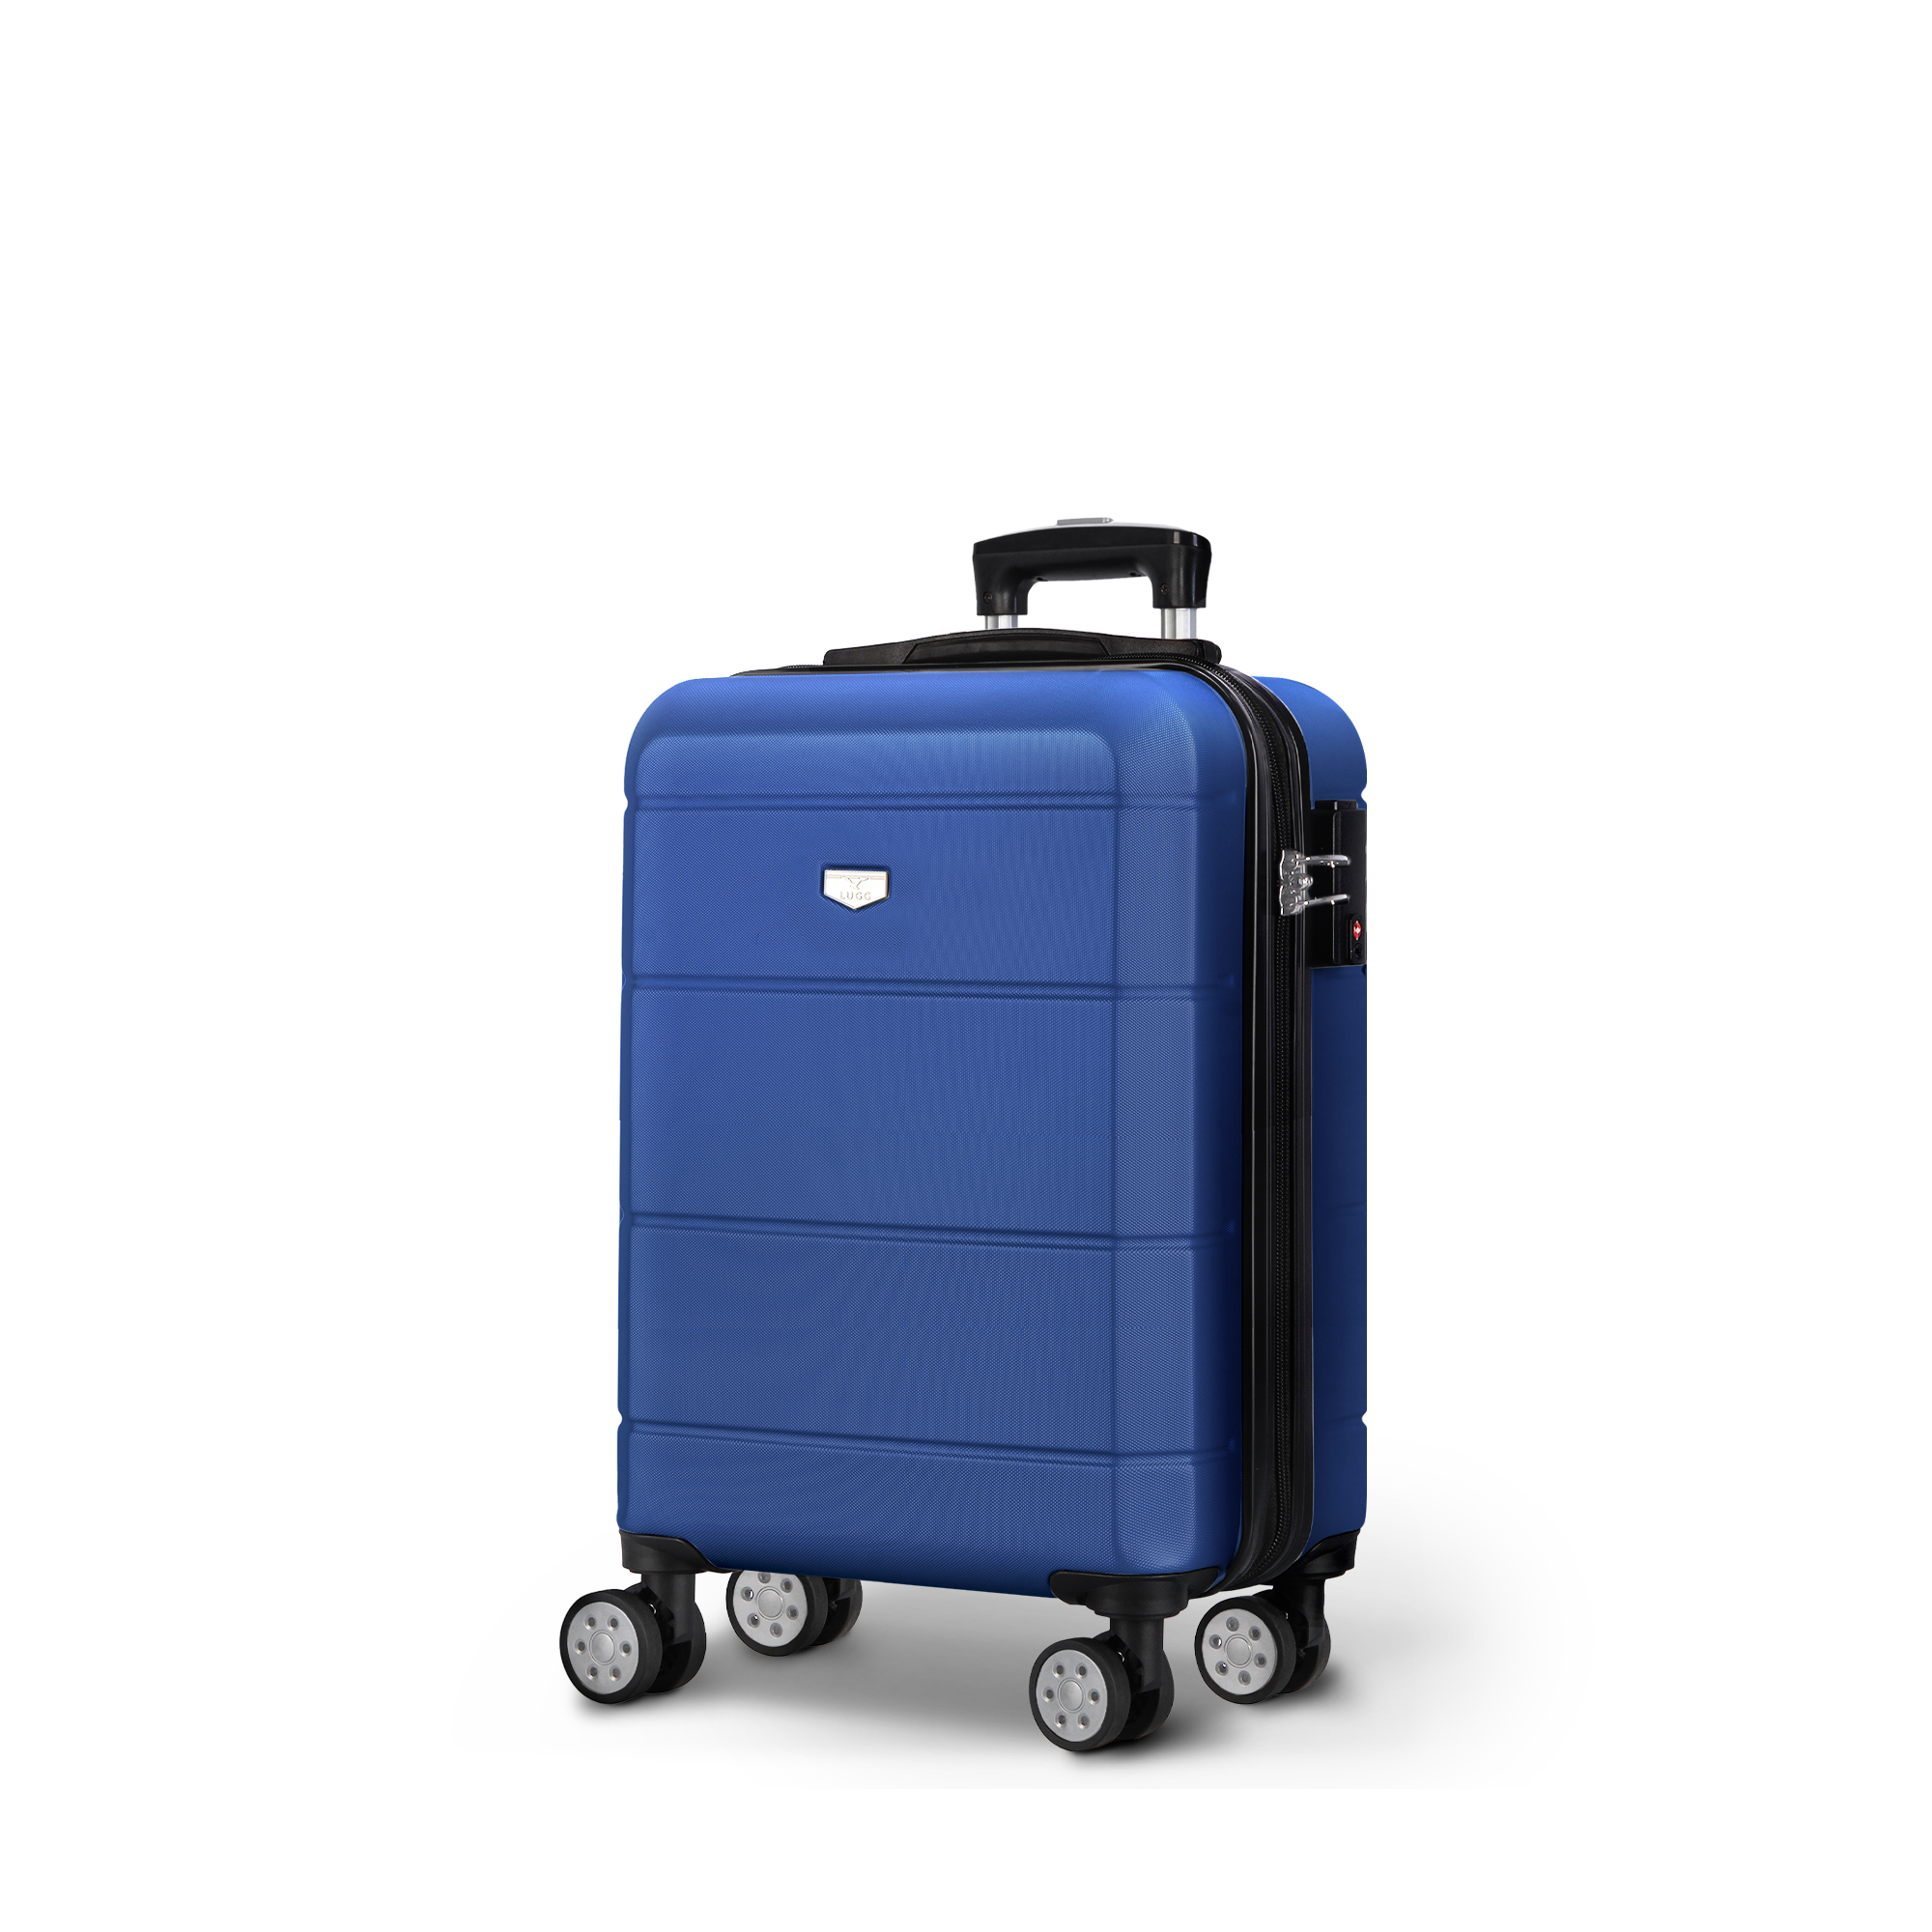 Jetset 20-inch Suitcase in Blue